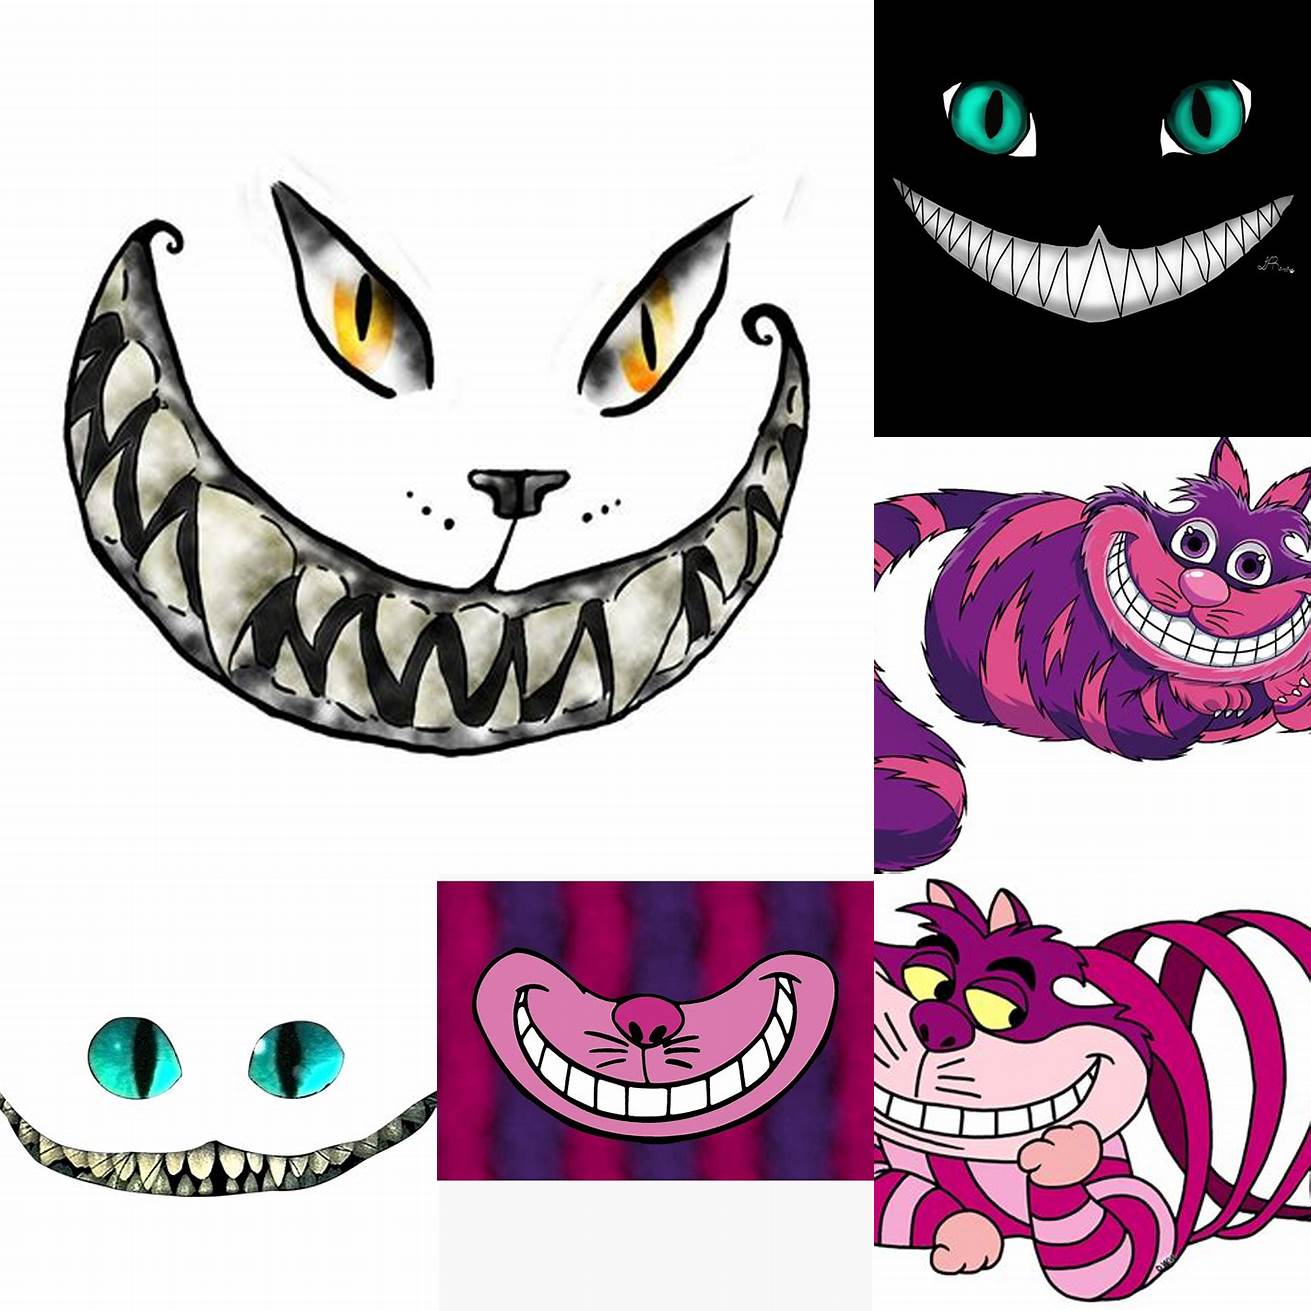 The Cheshire Cats grin has become a cultural icon